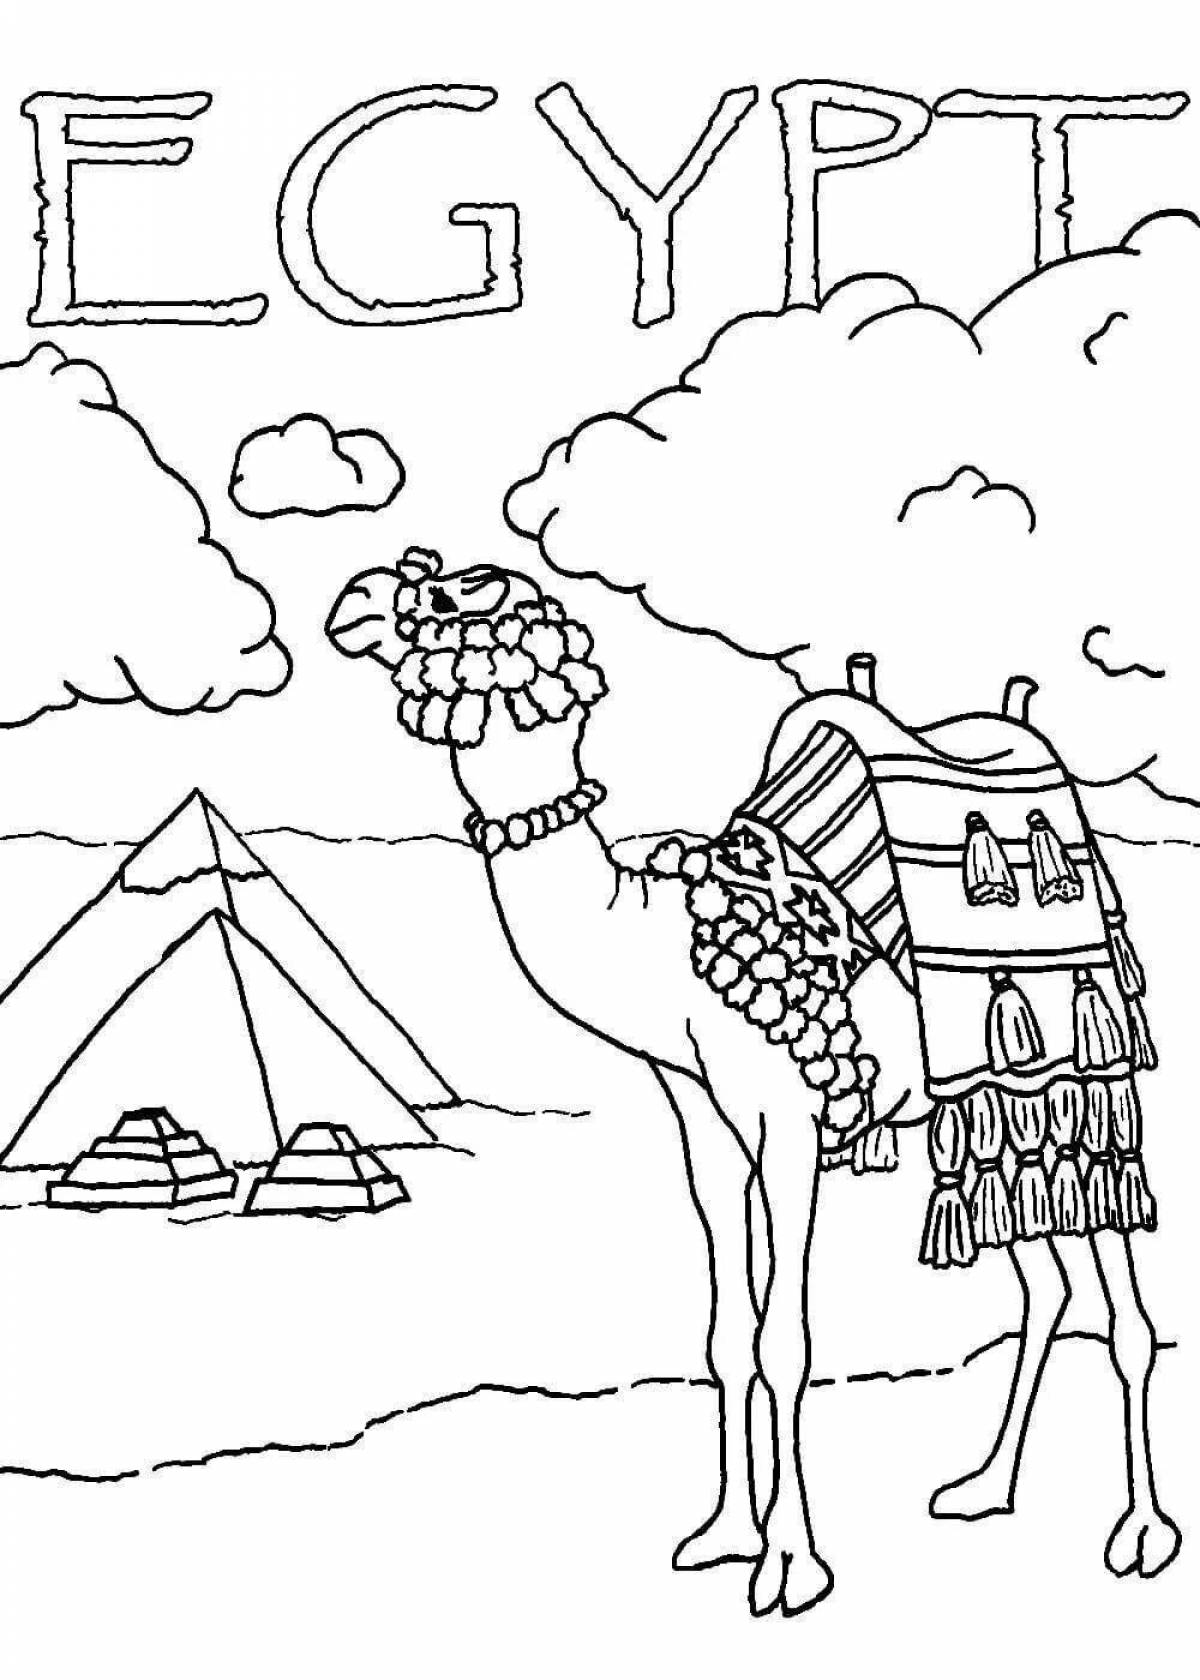 Egypt coloring pages for kids